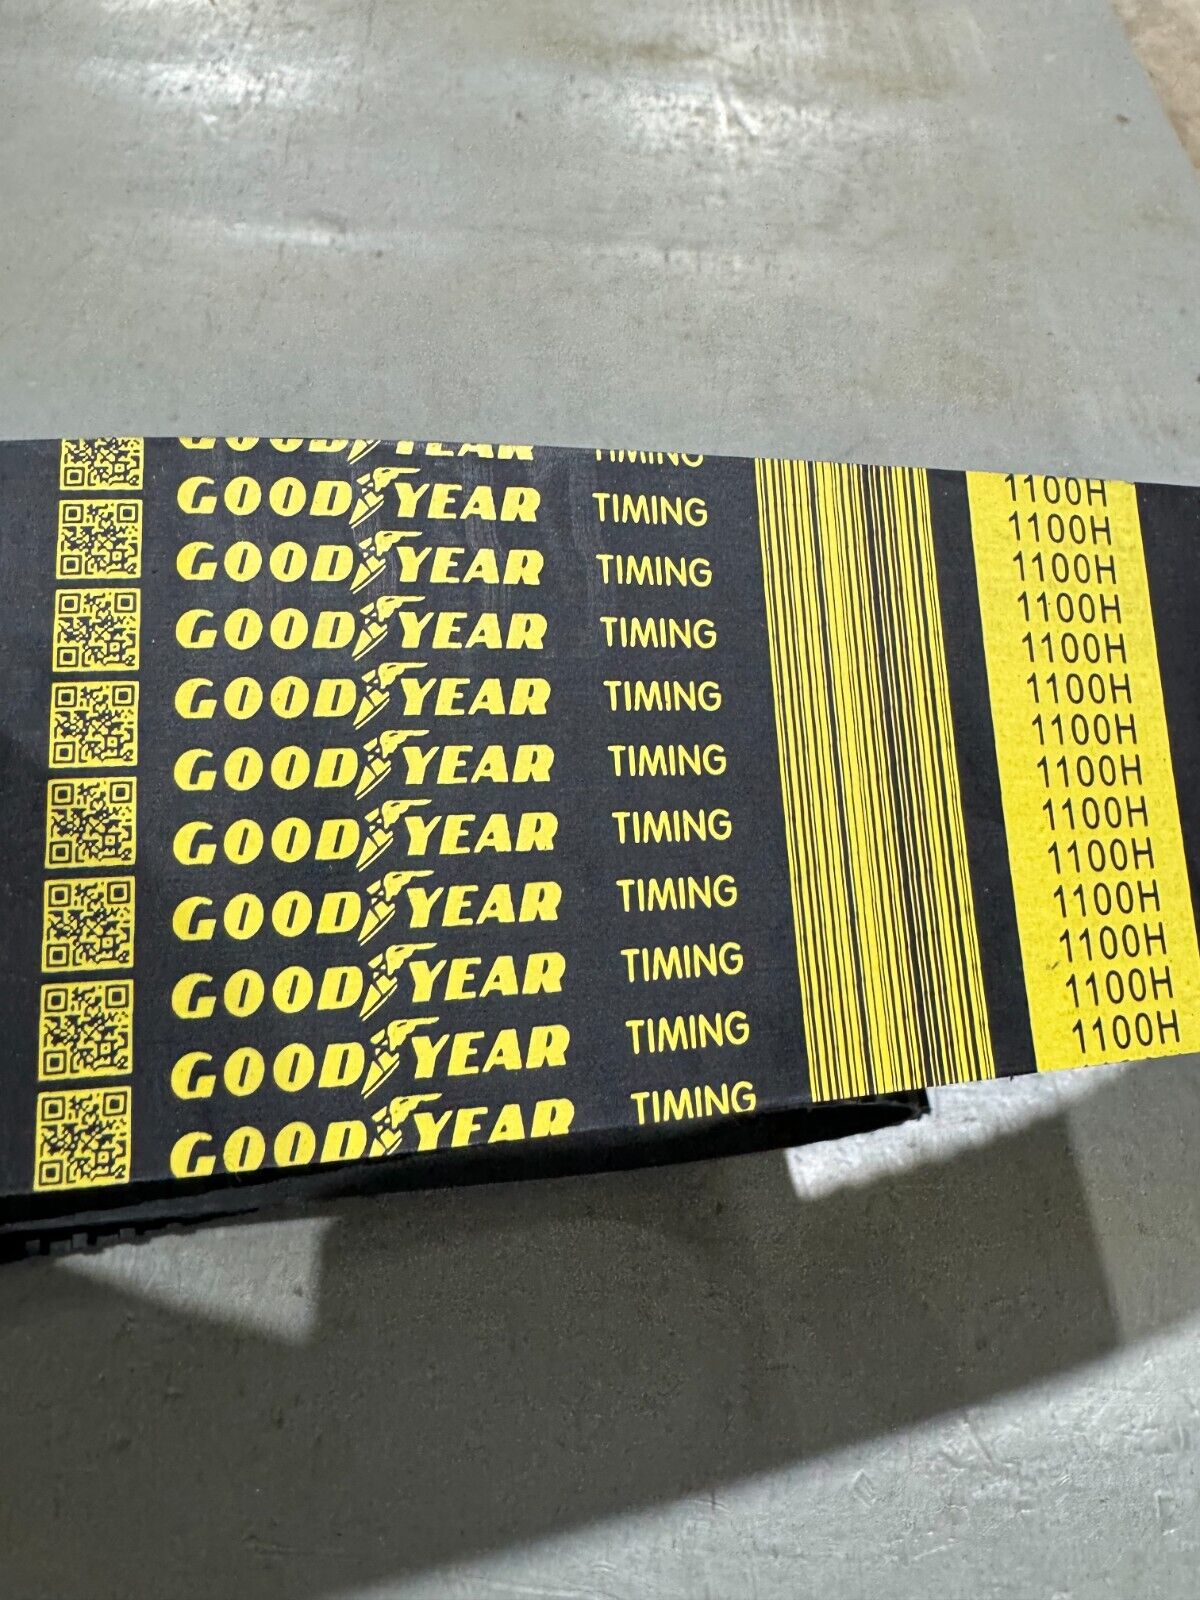 FACTORY NEW GOODYEAR 1100H TIMING BELT 1100H300